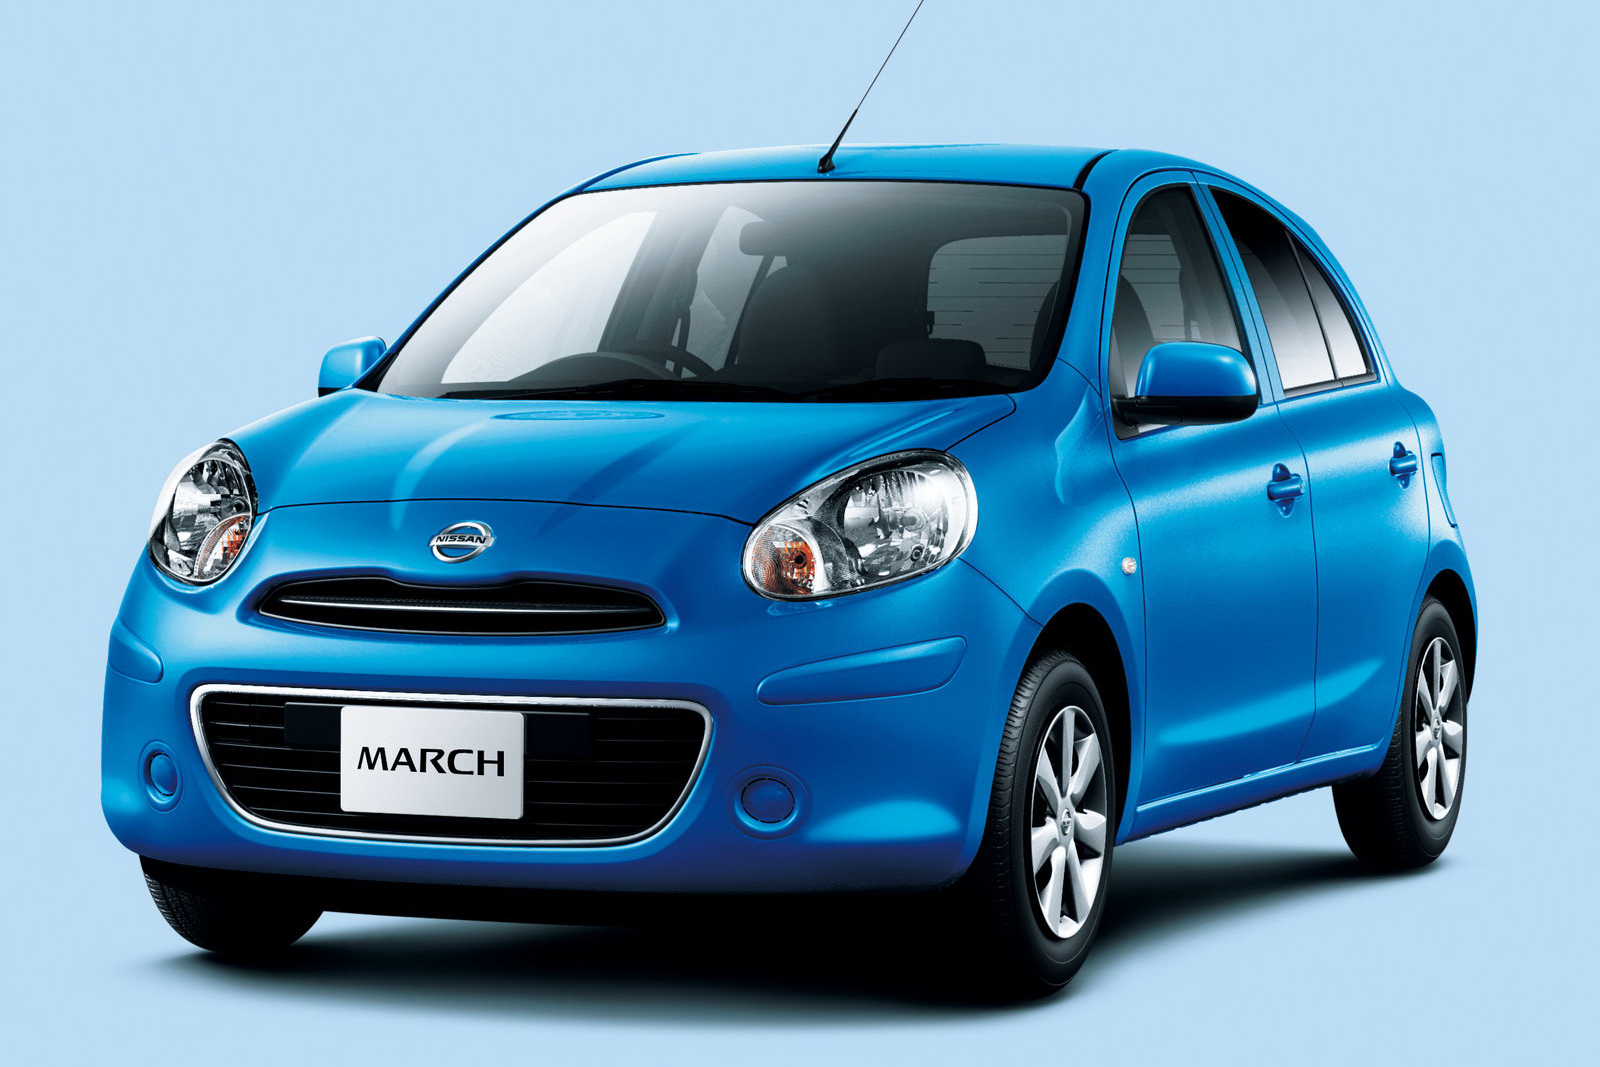 Nissan March 2013 Specification Cars for sale - Global Auto Trader's  Marketplace autowini.com